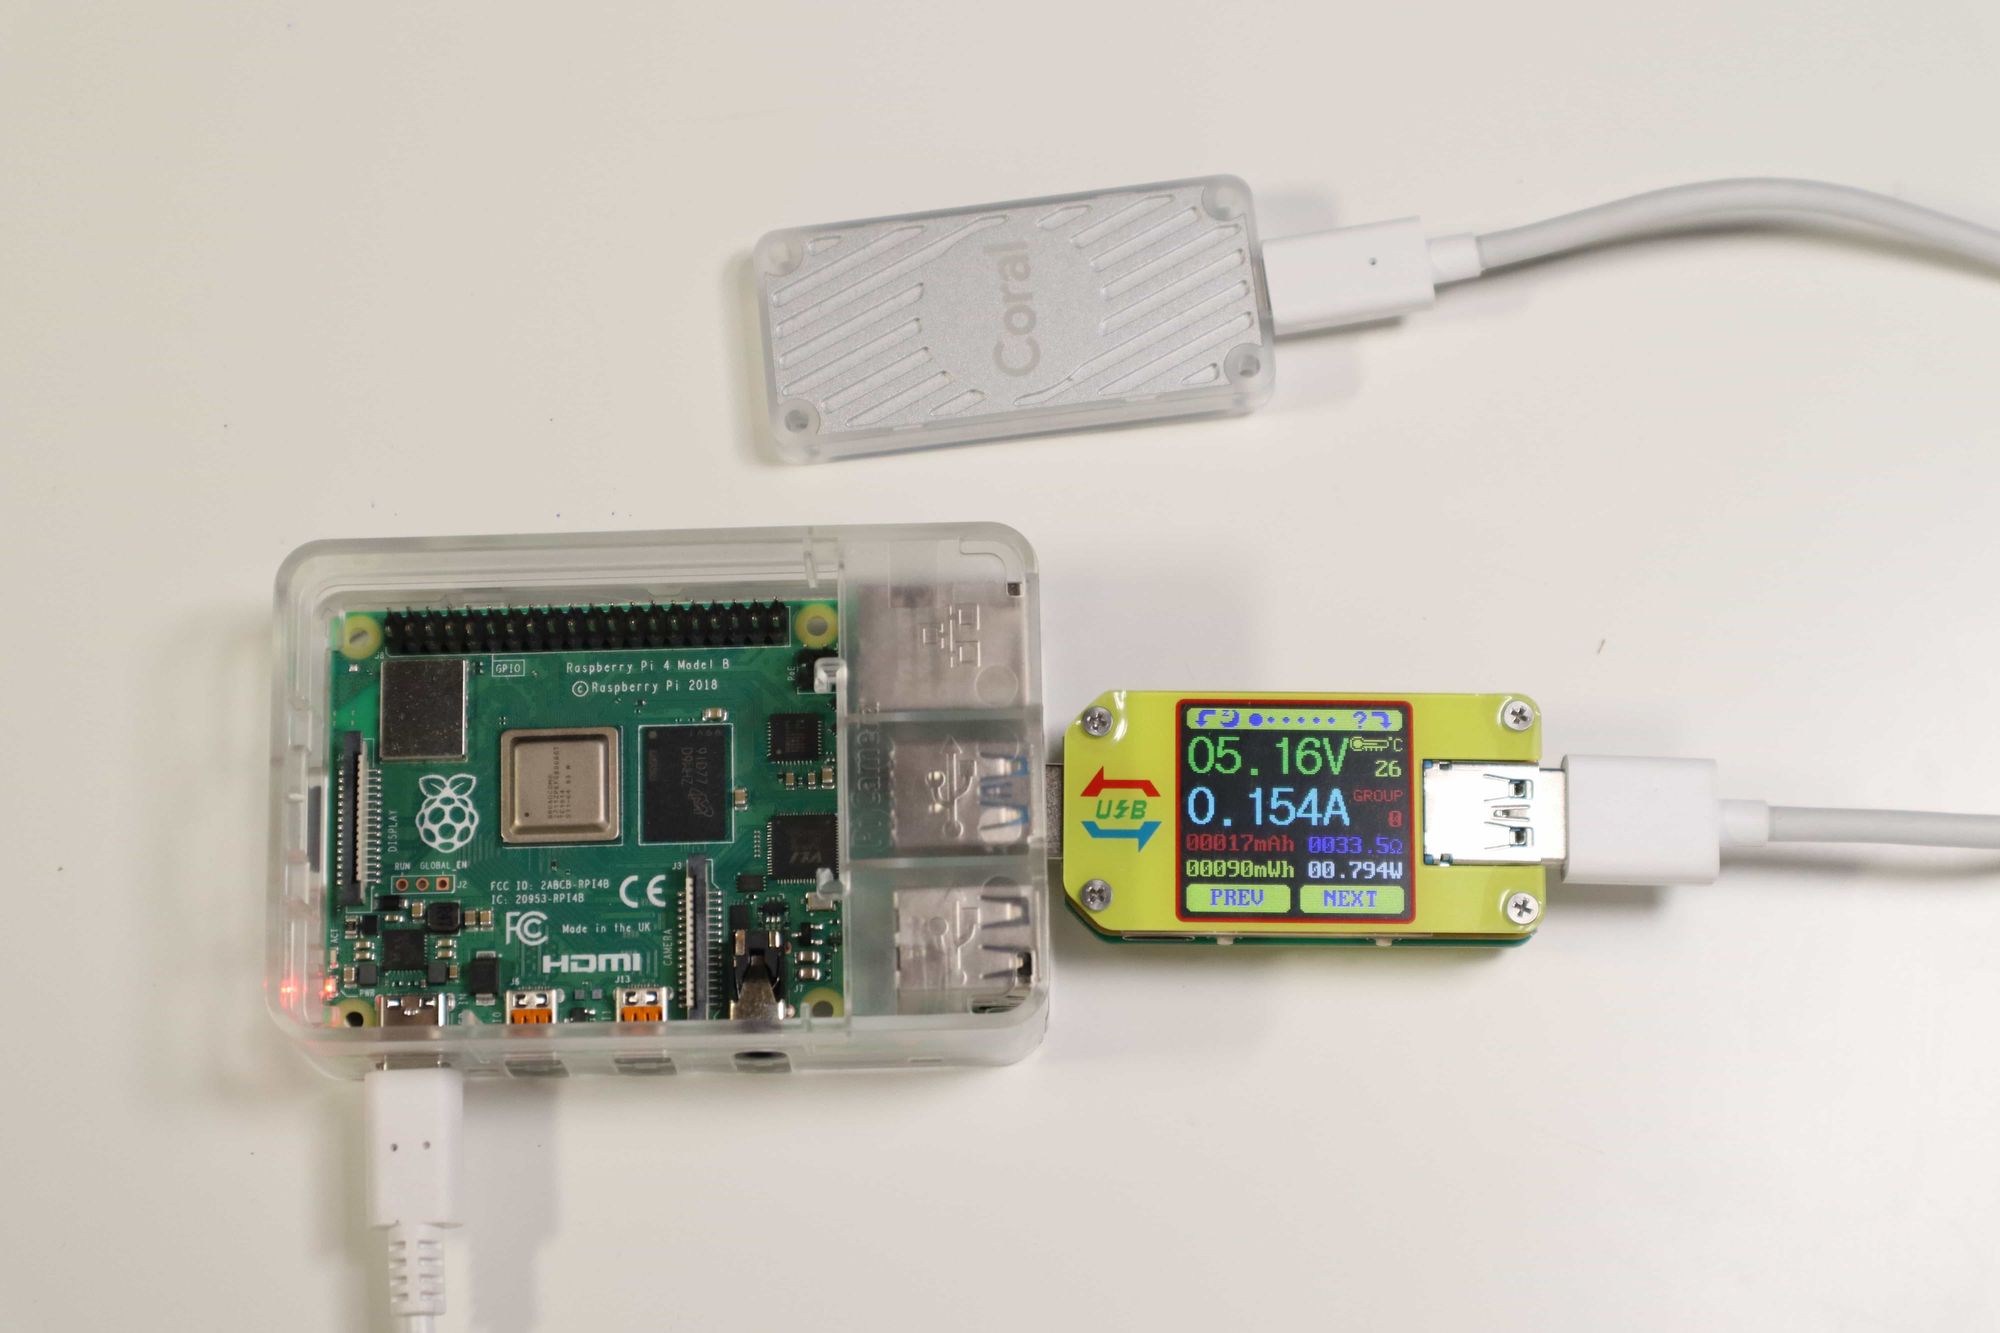 Connect to th Raspberry Pi + Current consumption